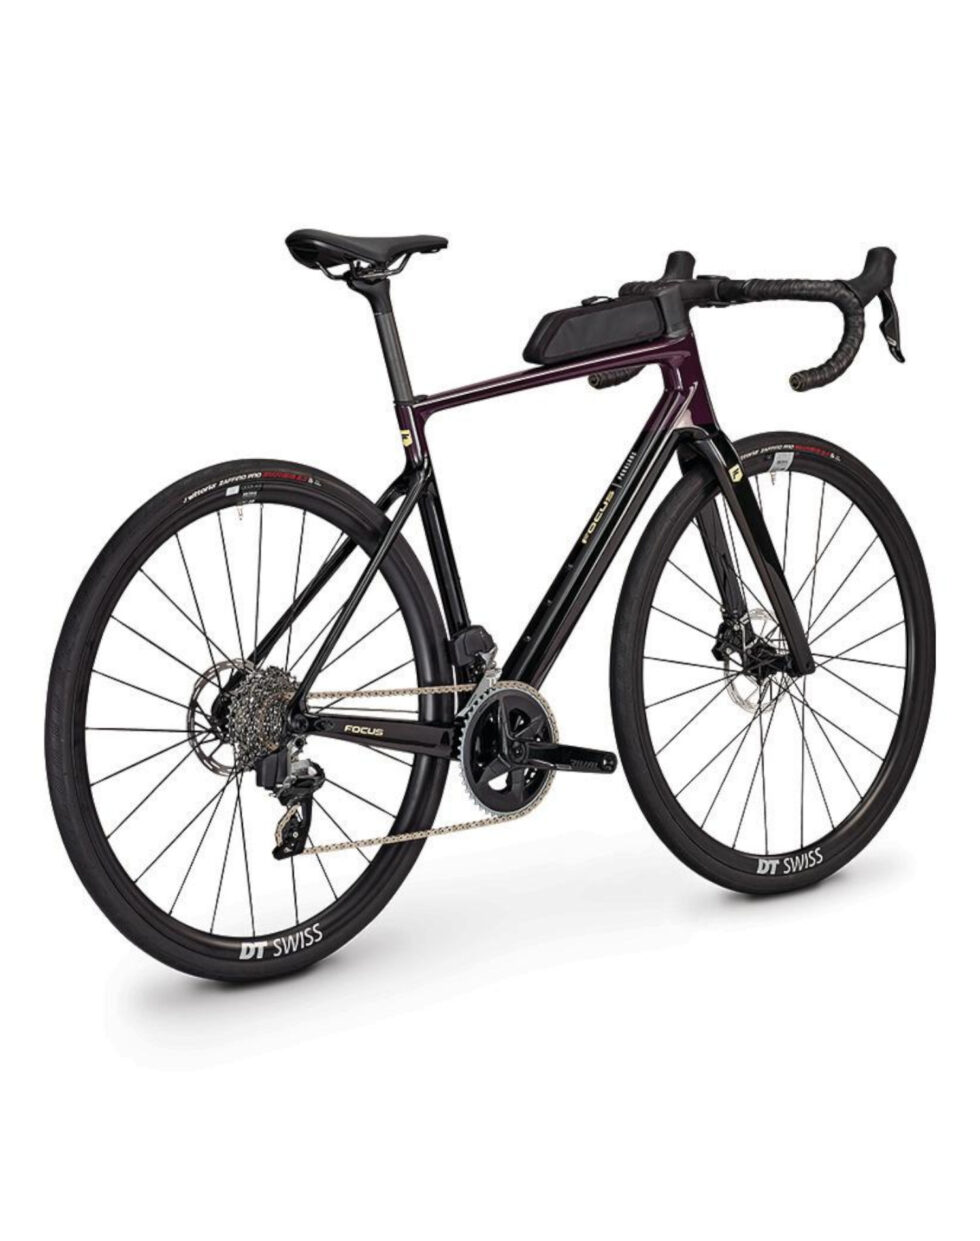 FOCUS Paralane 8.8 Dark Violet Glossy / Carbon Raw Glossy - Immagine 1